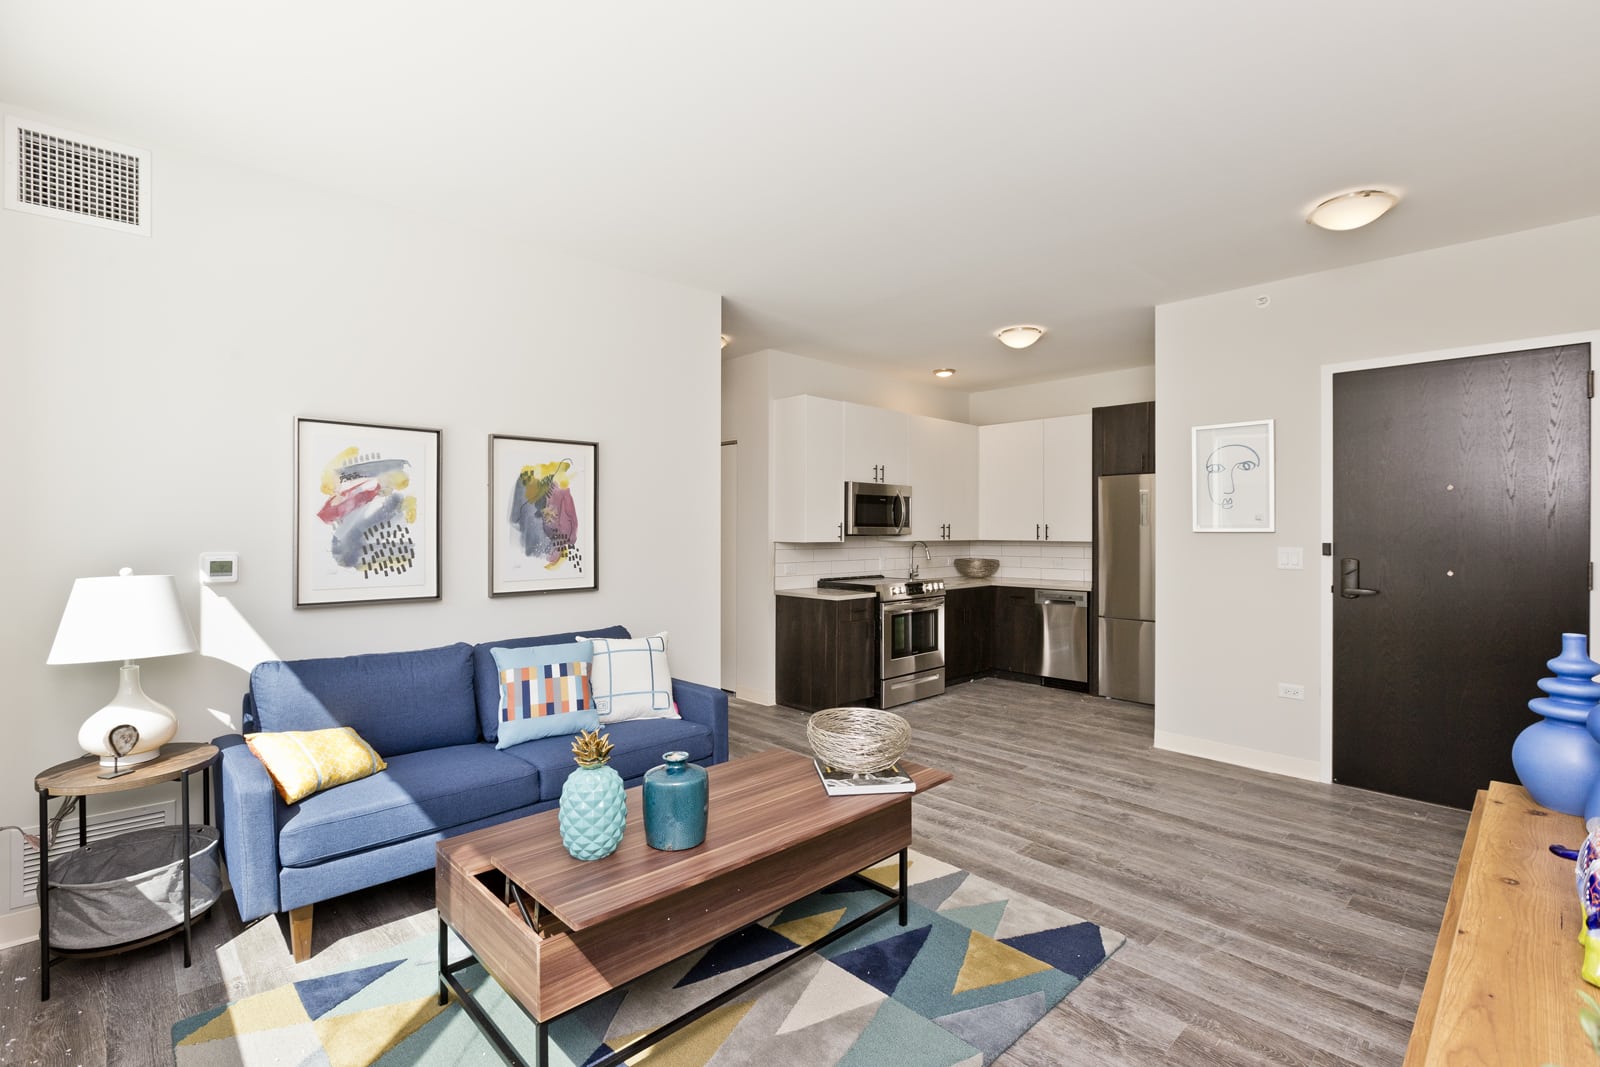 ONE BED: LAYOUT B2 - Experience Unparalled Living in the Heart of Edgewater